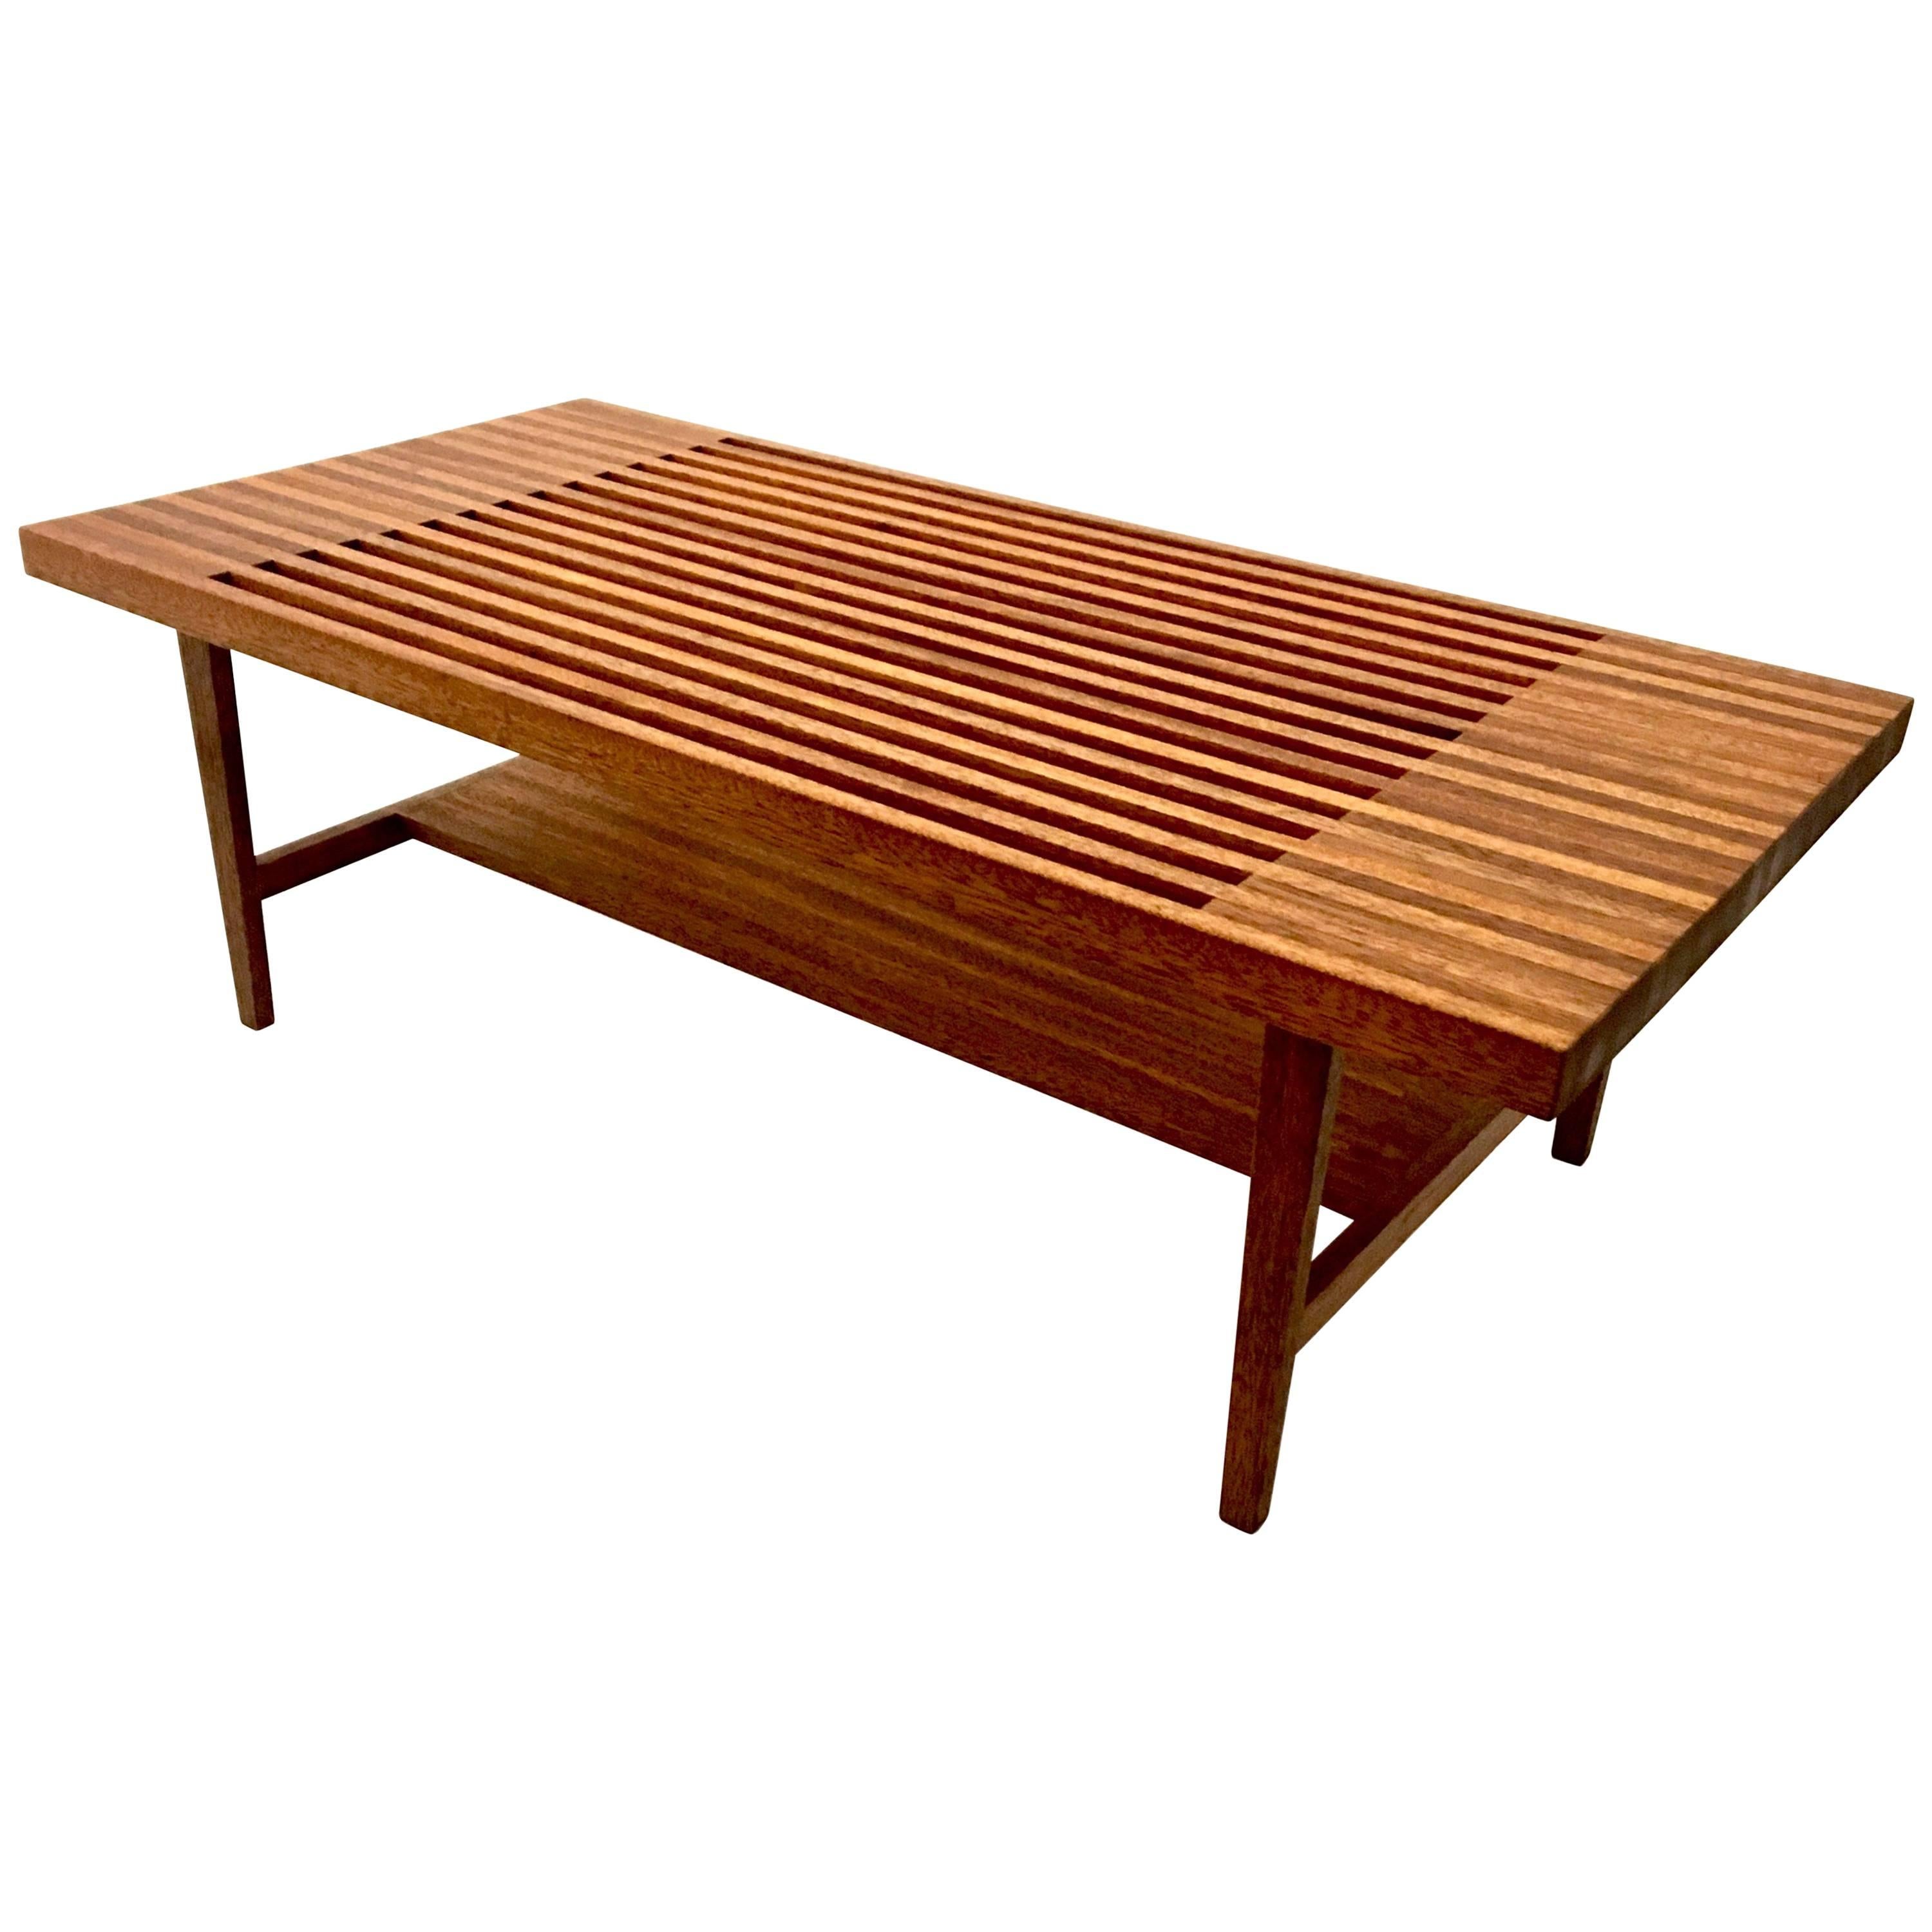 One Mid-Century Modern Solid Mahogany Coffee Table with Shelf